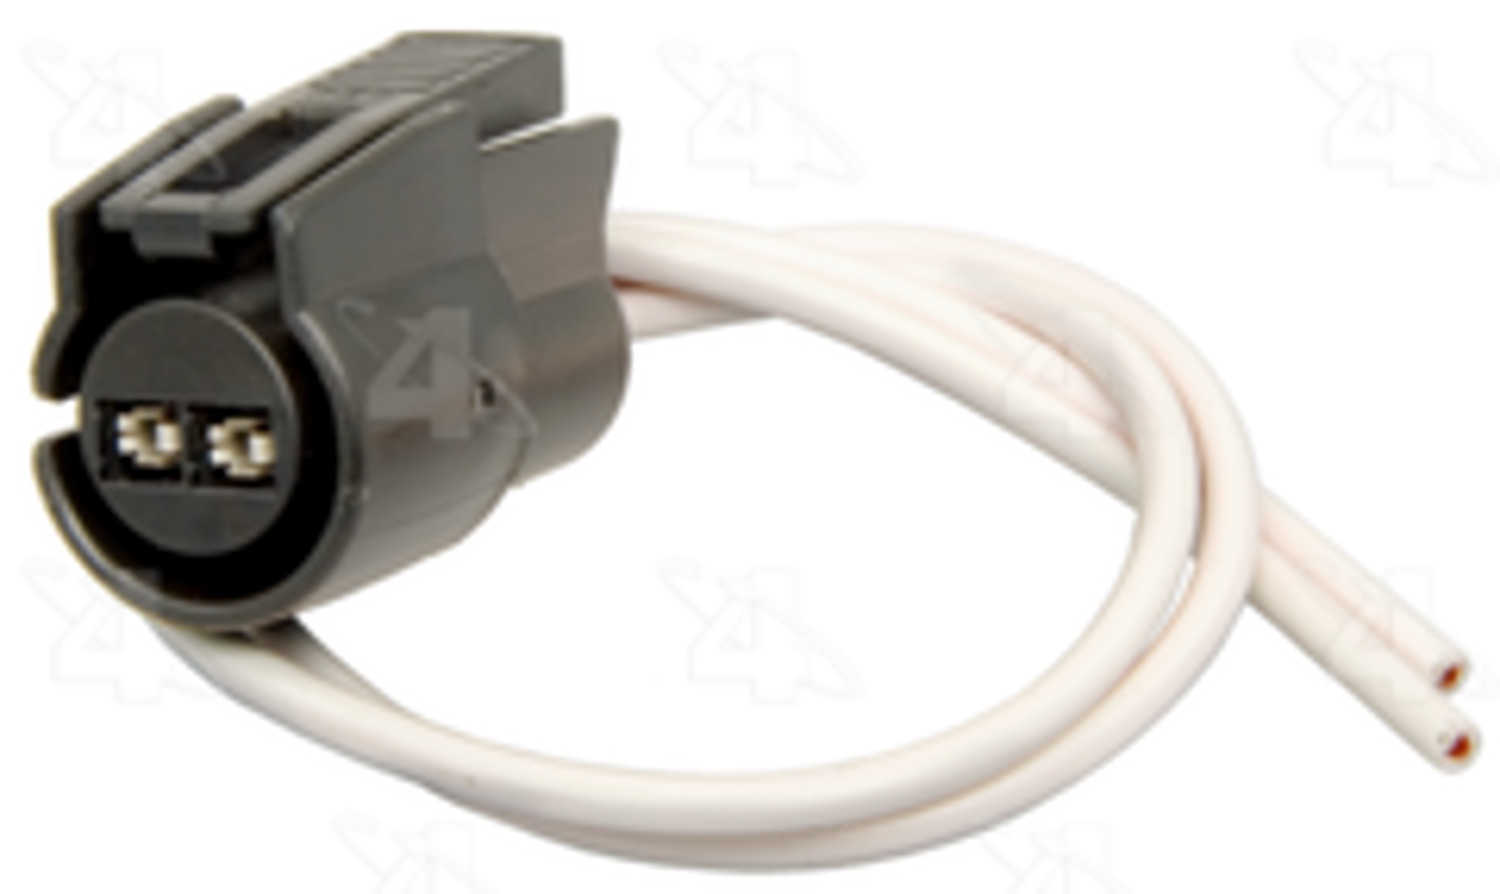 FOUR SEASONS - A/C Clutch Cycle Switch Connector - FSE 37227